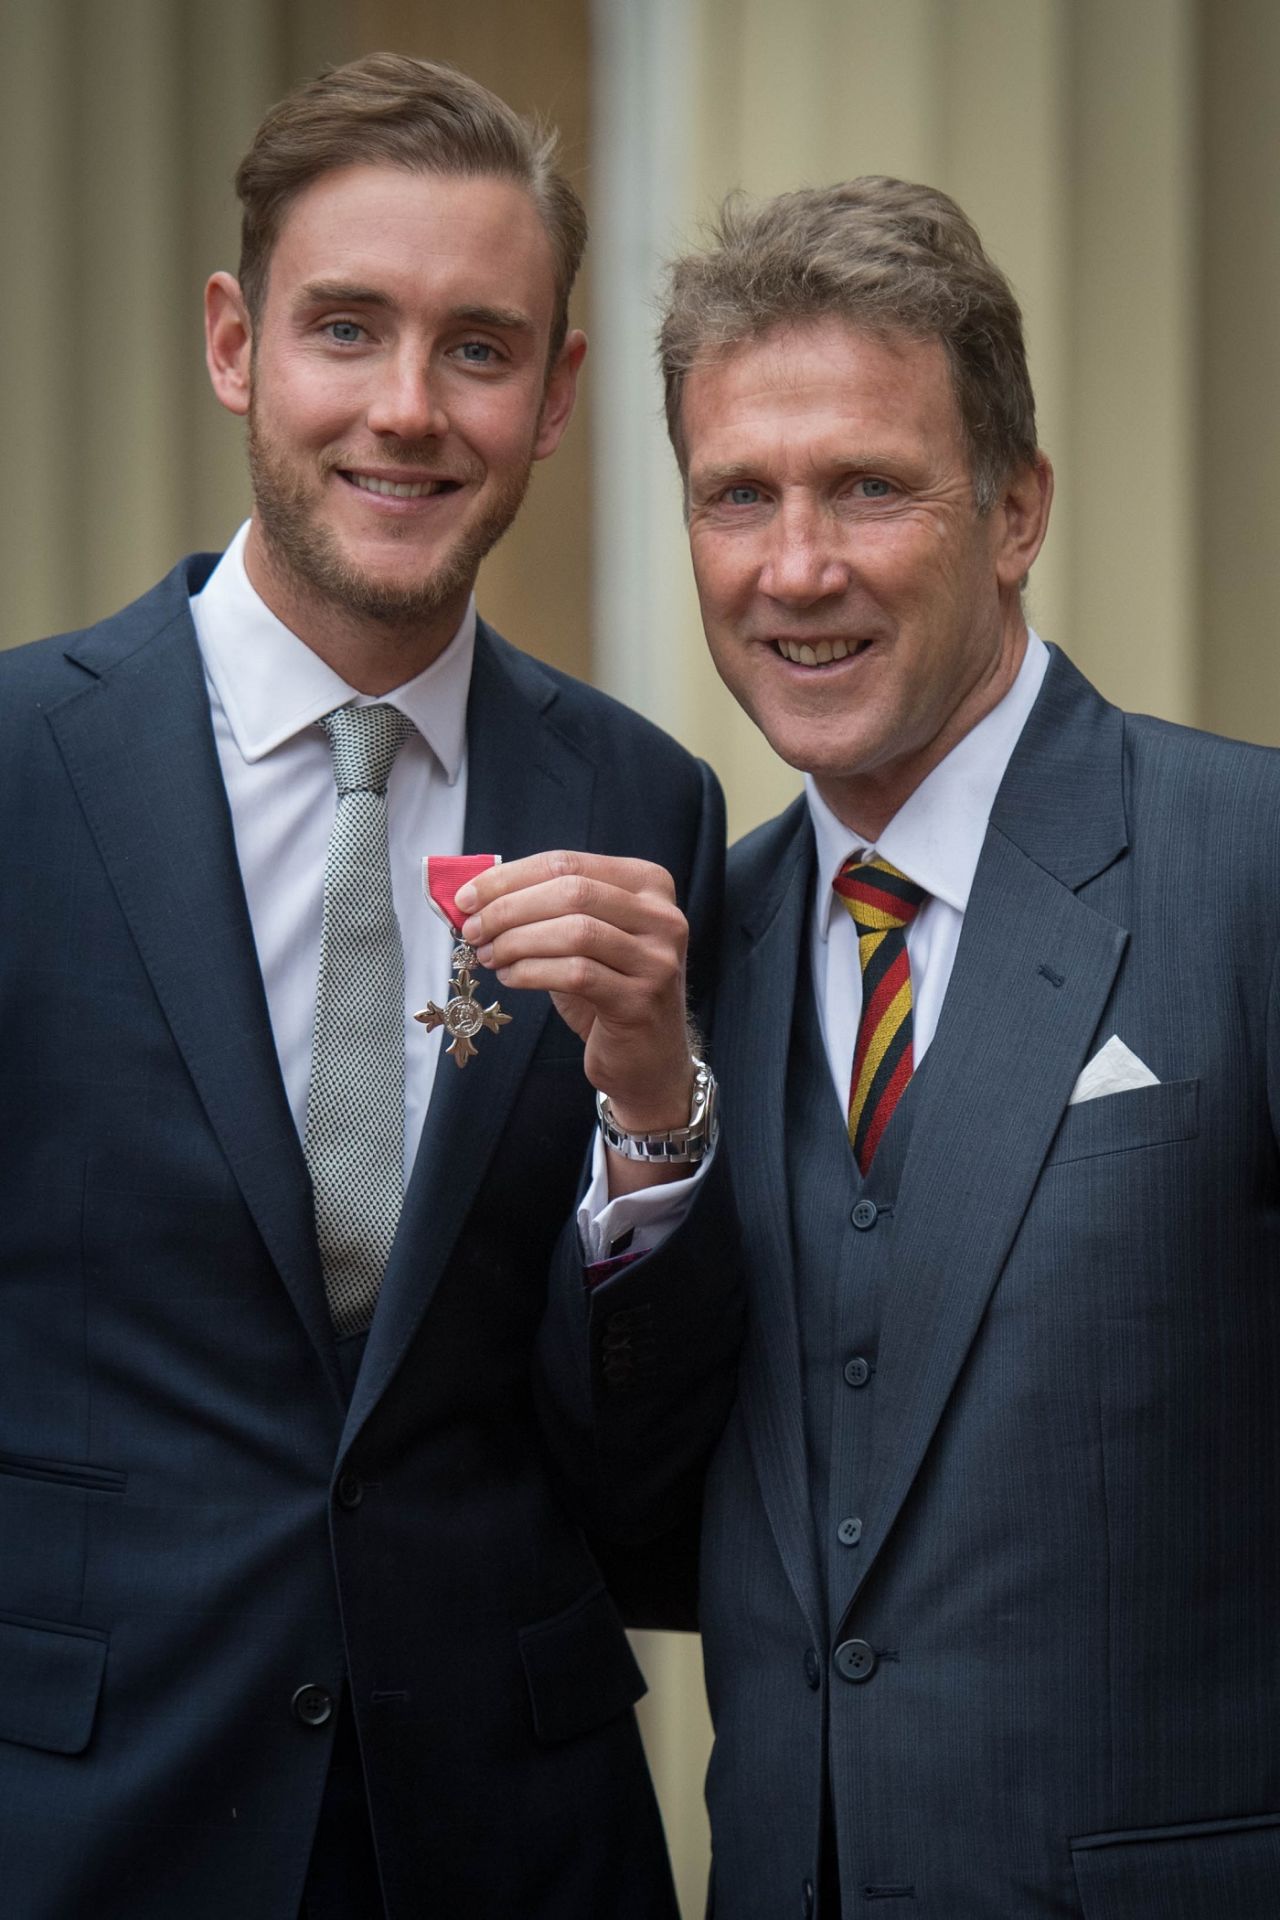 Stuart Broad with his father Chris Broad, after being appointed a Member of the Order of the British Empire (MBE) by the Prince of Wales at an investiture ceremony at Buckingham Palace, London, February 10, 2017